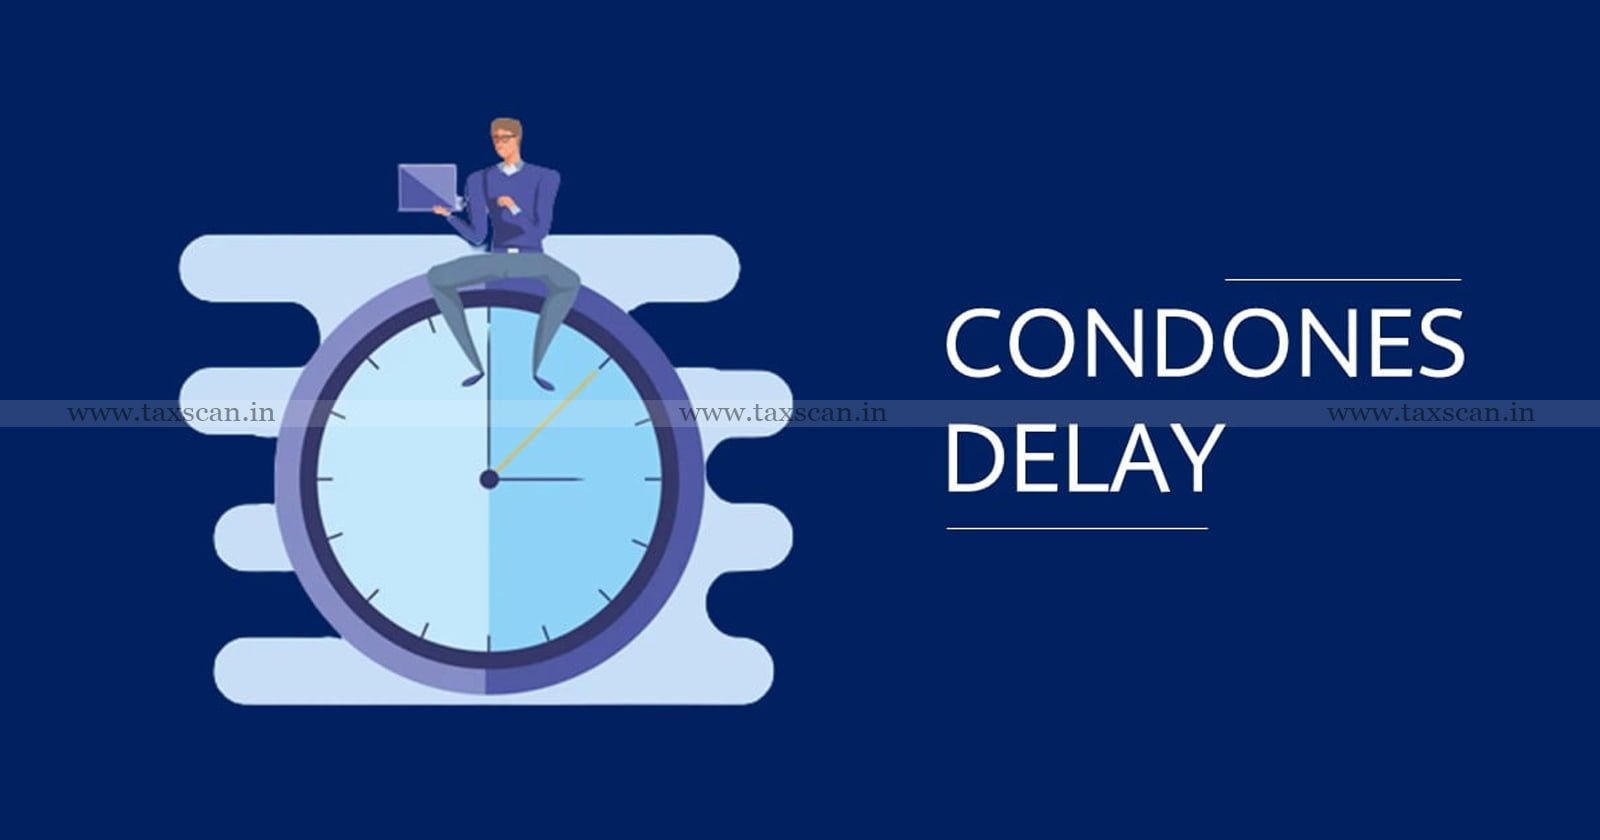 Unexplained and Inordinate Delay - Inordinate Delay - Unexplained Delay - Ostensible Reasons - High Court of Delhi - Delhi High Court - Condonation of Delay - taxscan